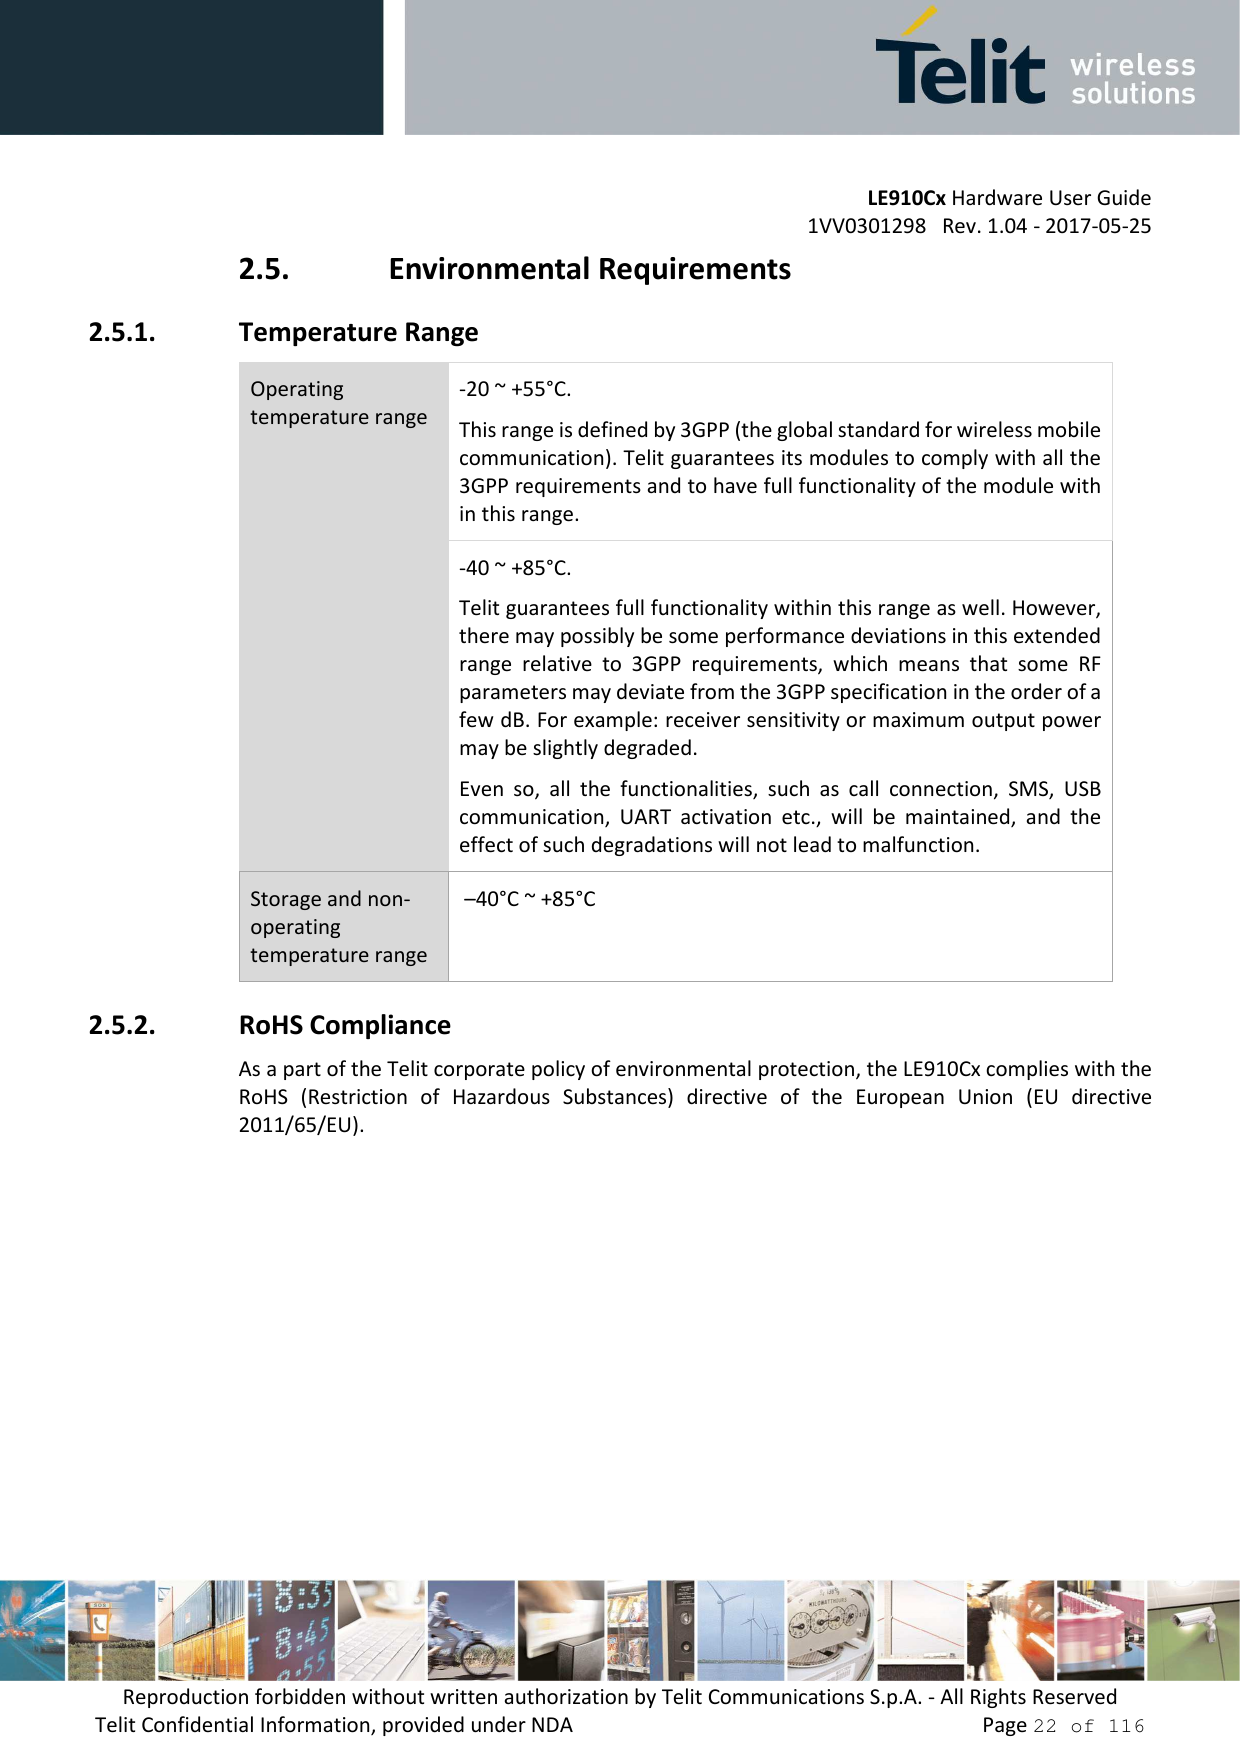         LE910Cx Hardware User Guide 1VV0301298   Rev. 1.04 - 2017-05-25 Reproduction forbidden without written authorization by Telit Communications S.p.A. - All Rights Reserved Telit Confidential Information, provided under NDA                 Page 22 of 116 2.5. Environmental Requirements 2.5.1. Temperature Range Operating temperature range -20 ~ +55°C.  This range is defined by 3GPP (the global standard for wireless mobile communication). Telit guarantees its modules to comply with all the 3GPP requirements and to have full functionality of the module with in this range. -40 ~ +85°C.  Telit guarantees full functionality within this range as well. However, there may possibly be some performance deviations in this extended range  relative  to  3GPP  requirements,  which  means  that  some  RF parameters may deviate from the 3GPP specification in the order of a few dB. For example: receiver sensitivity or maximum output power may be slightly degraded.  Even  so,  all  the  functionalities,  such  as  call  connection,  SMS,  USB communication,  UART  activation  etc.,  will  be  maintained,  and  the effect of such degradations will not lead to malfunction. Storage and non-operating temperature range  –40°C ~ +85°C 2.5.2. RoHS Compliance As a part of the Telit corporate policy of environmental protection, the LE910Cx complies with the RoHS  (Restriction  of  Hazardous  Substances)  directive  of  the  European  Union  (EU  directive 2011/65/EU).    